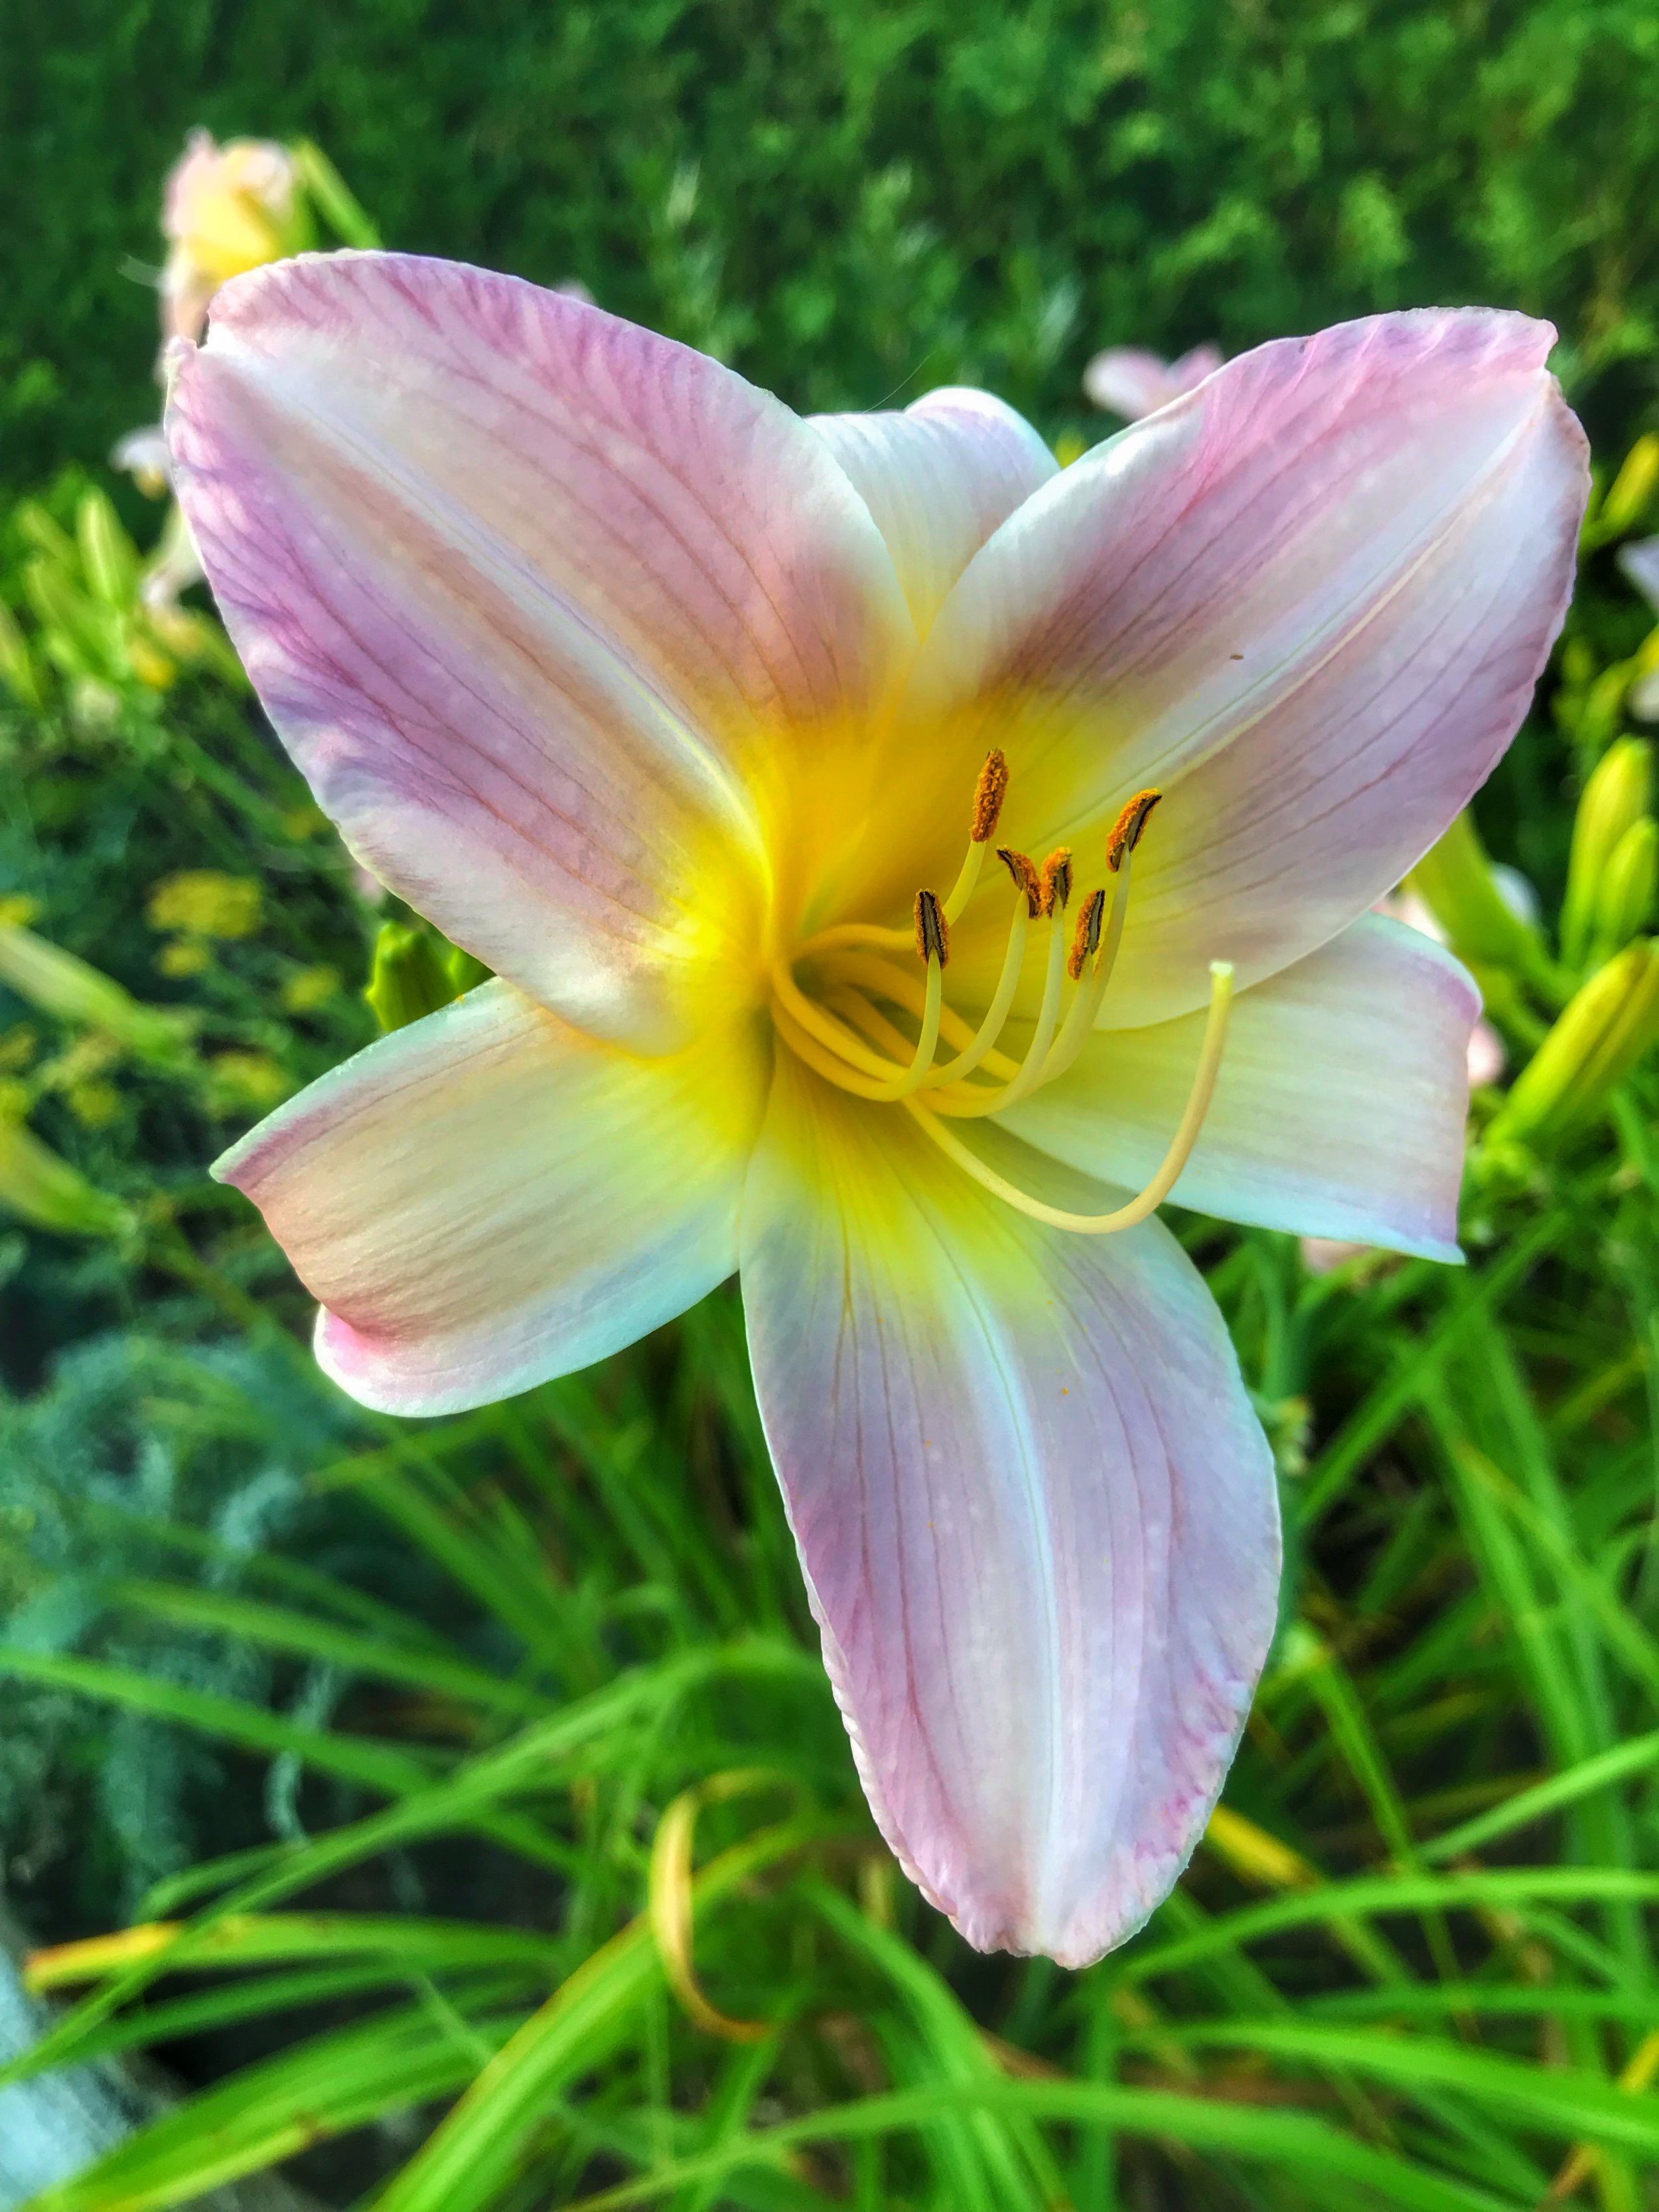 Another Daylily